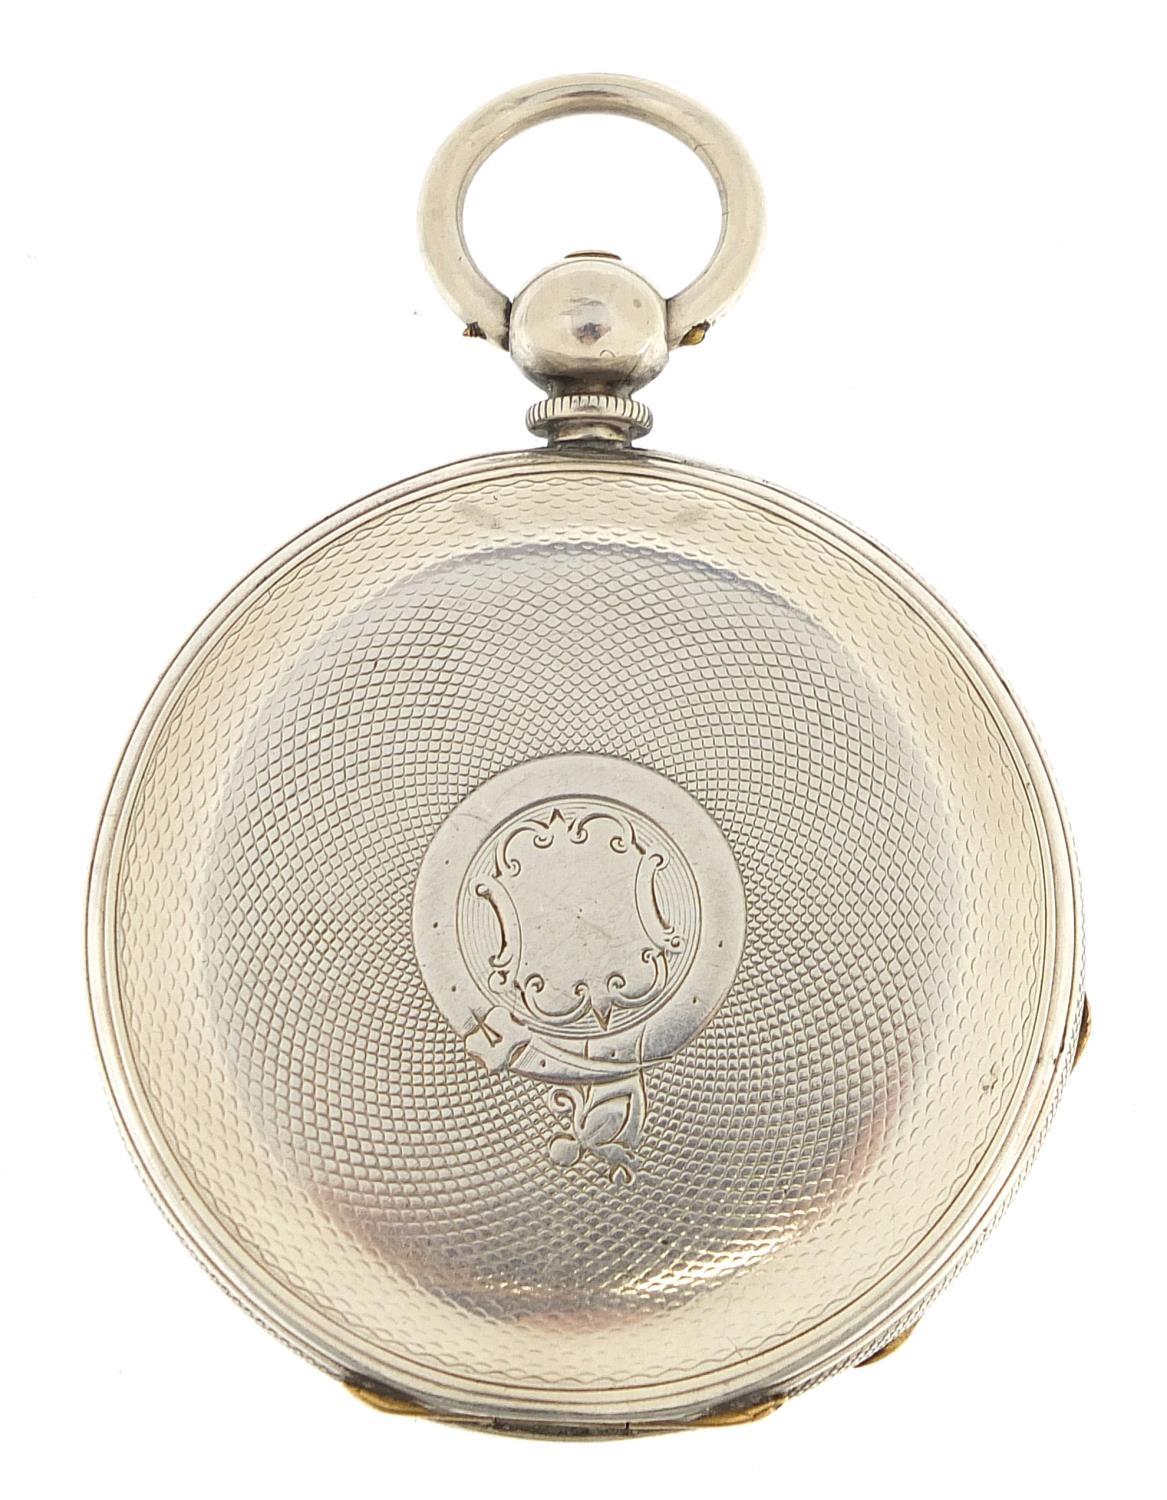 Gentlemen's silver full hunter pocket watch with ornate silvered and gilt dial, 50mm in diameter - Image 2 of 6